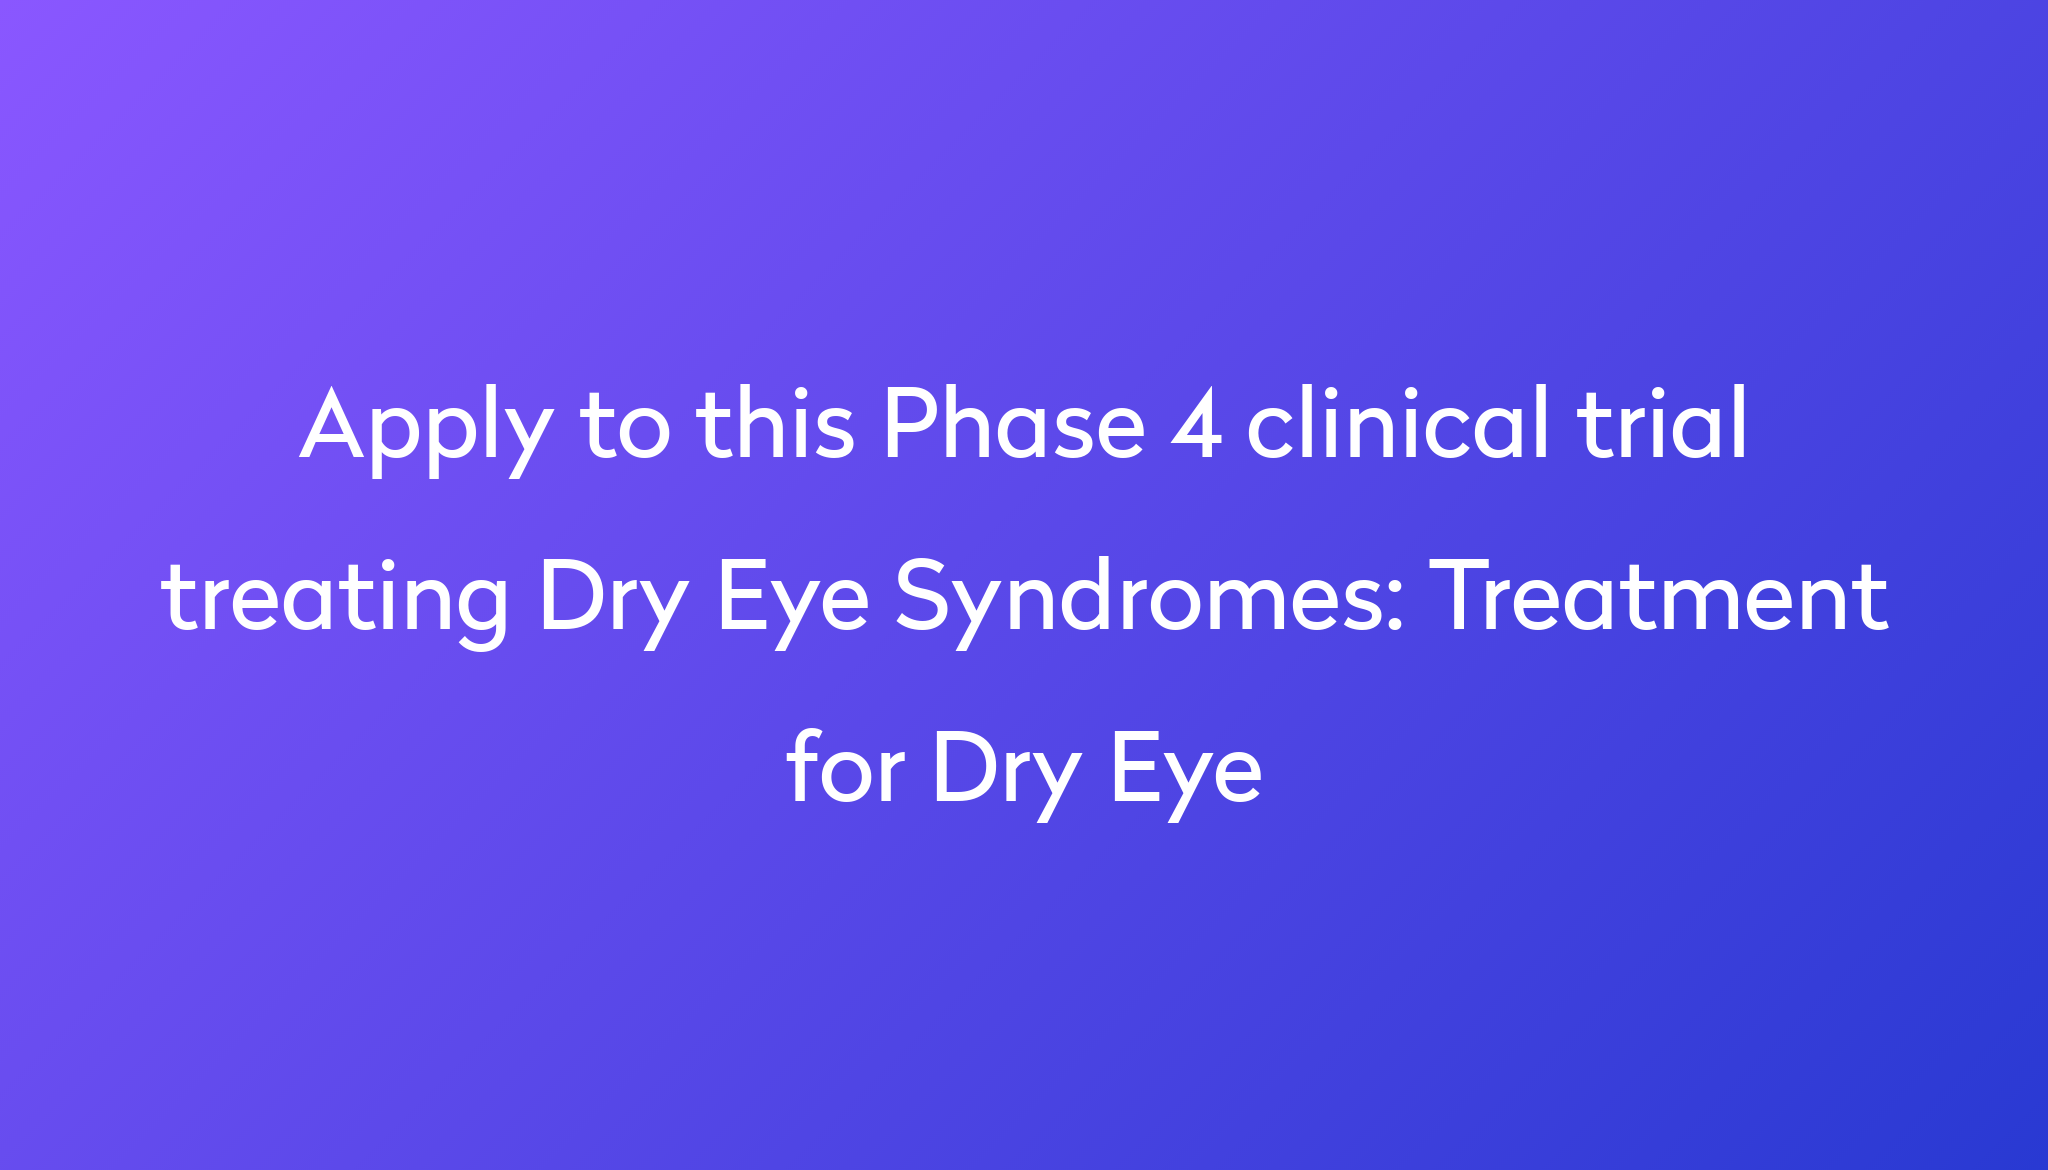 Treatment for Dry Eye Clinical Trial 2022 Power